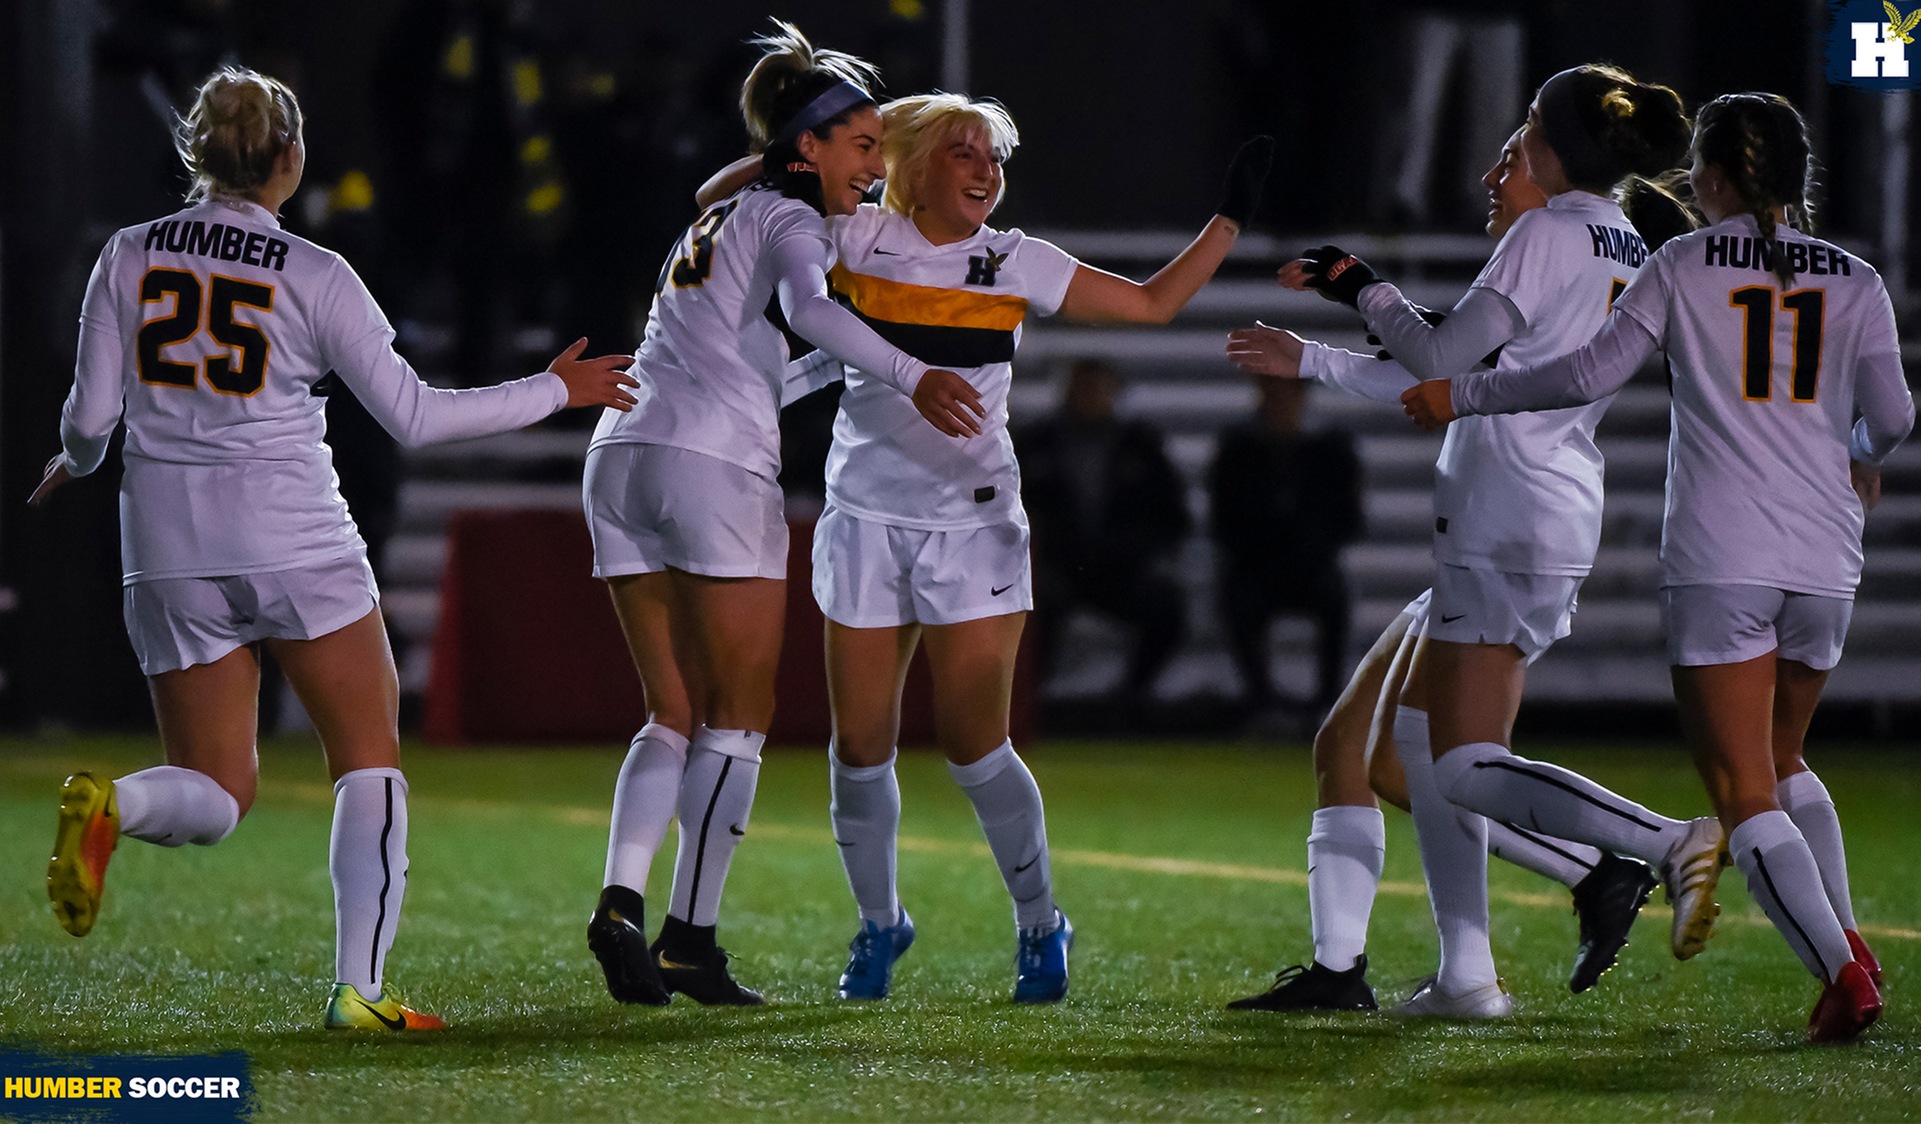 No. 4 WOMEN'S SOCCER OPEN CHAMPIONSHIP IN DOMINANT FASHION